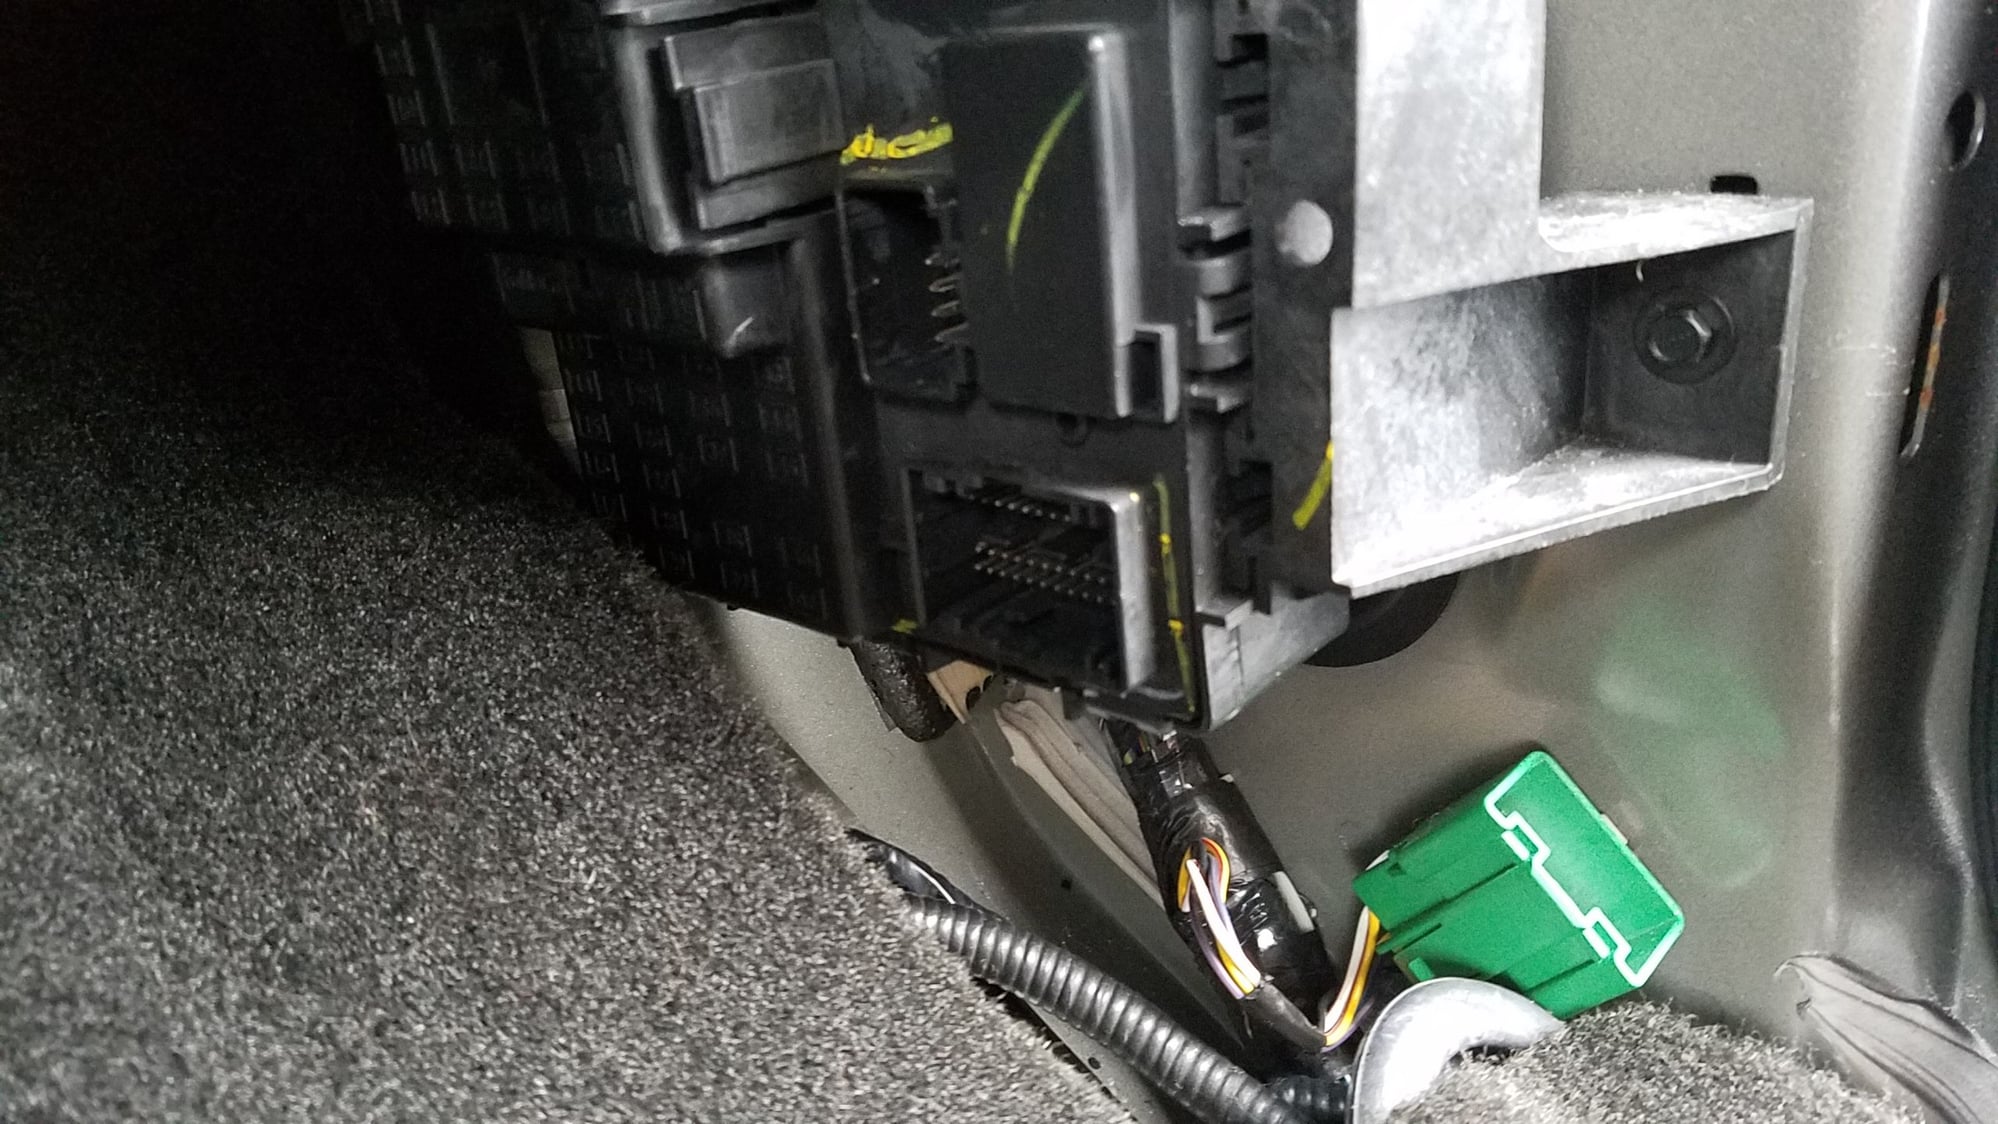 electricity failure in dashboard - Ford F150 Forum - Community of Ford